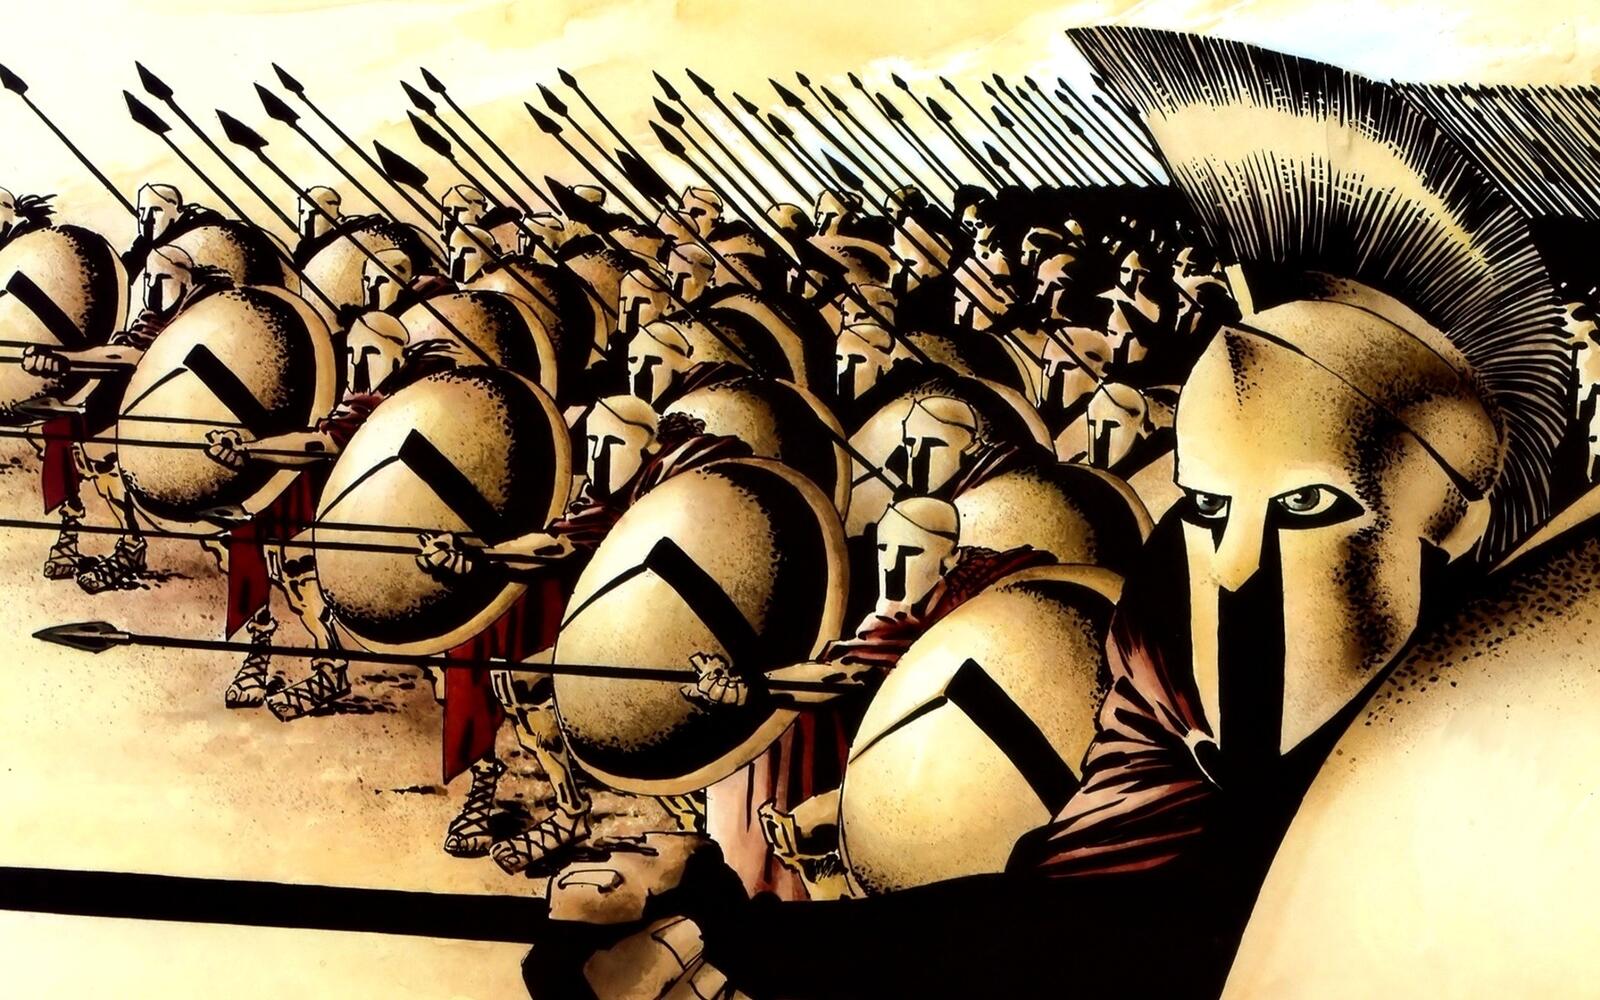 Wallpapers 300 Spartans spears shields on the desktop